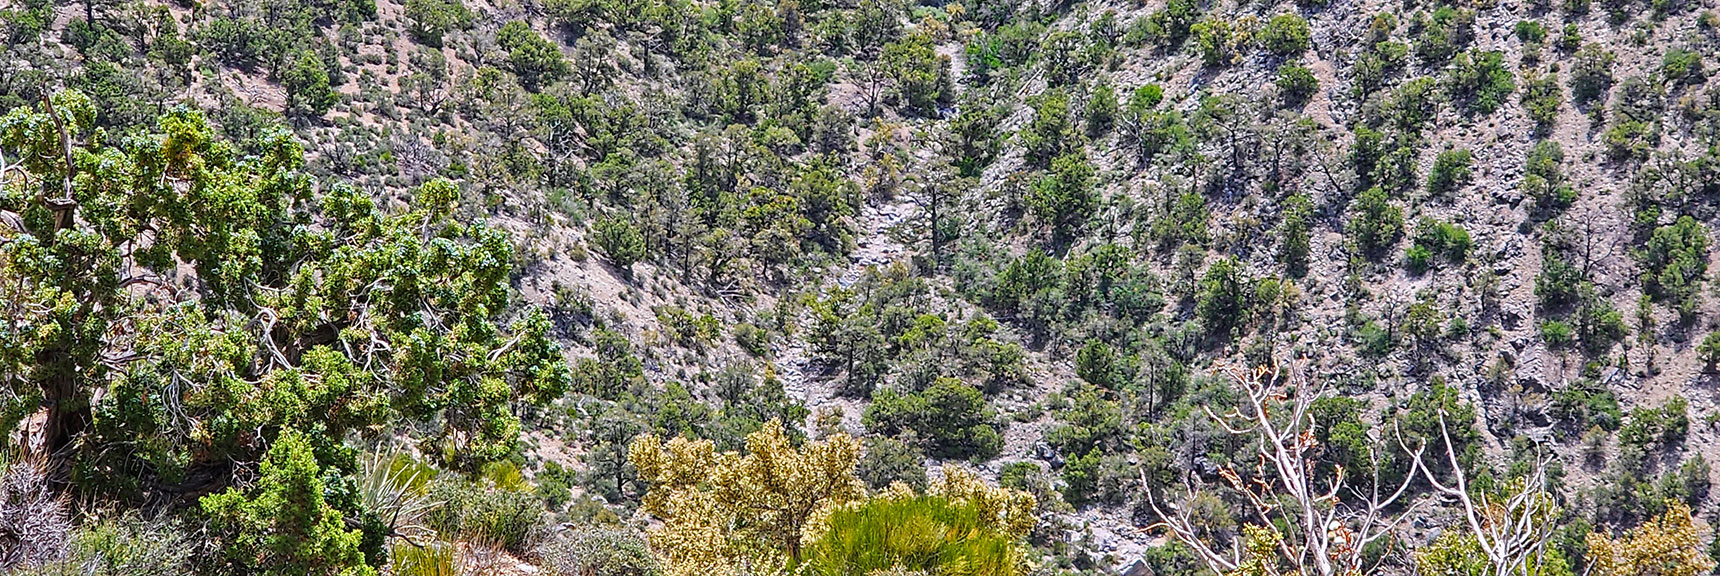 View Down into the Base of South Spring Canyon | Juniper Peak to Mt. Wilson | Rainbow Mountains Upper Crest Ridgeline, Nevada